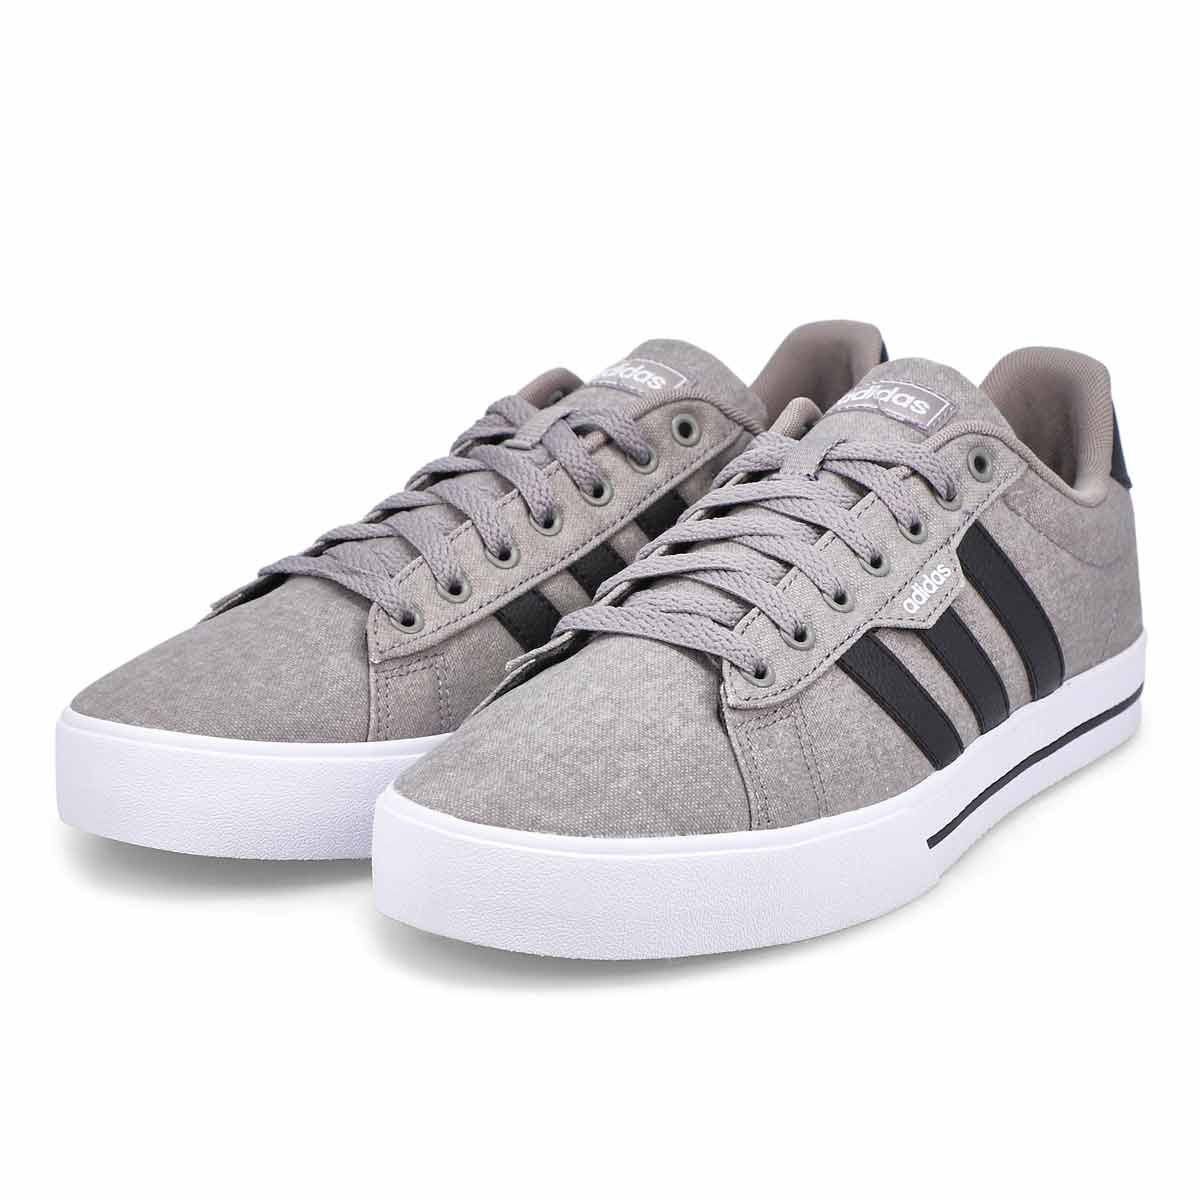 adidas Men's Daily 3.0 Lace Up Sneaker - Grey | SoftMoc.com